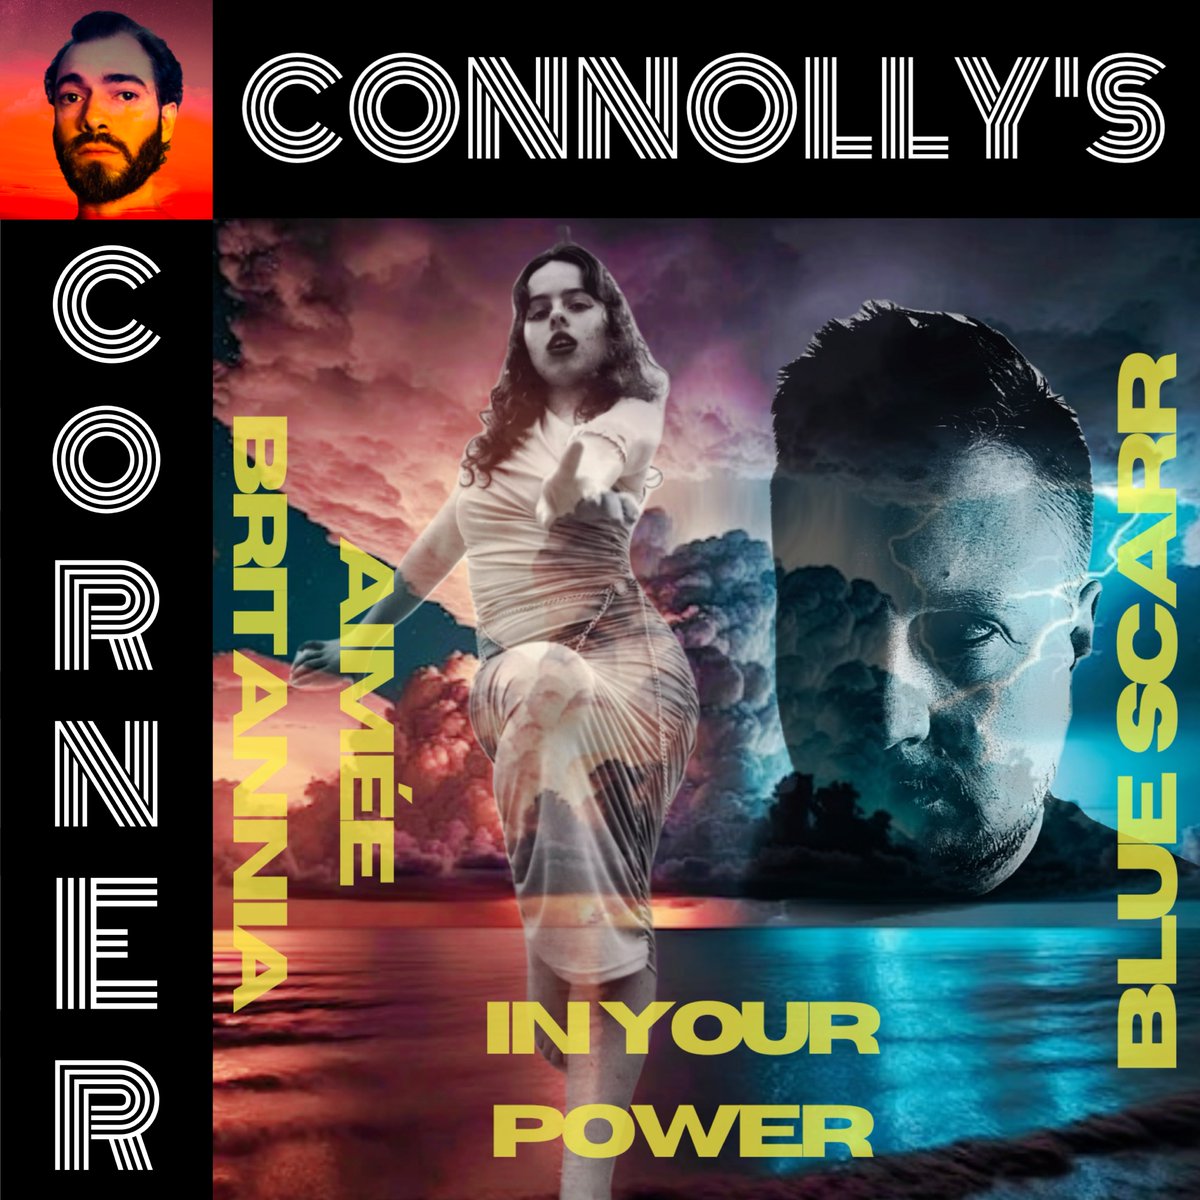 𝗖𝗼𝗻𝗻𝗼𝗹𝗹𝘆’𝘀 𝗖𝗼𝗿𝗻𝗲𝗿: In Your Power by @bluescarrmusic and @aimeebritannia Reviews by @ConnollyTunes Charles listens wherever egos… newartistspotlight.org/post/this-week… #UK #SouthAfrica #collab #dance #electronic #pop #club #singing #synth #beats #IWantMyNAS #StopPayola